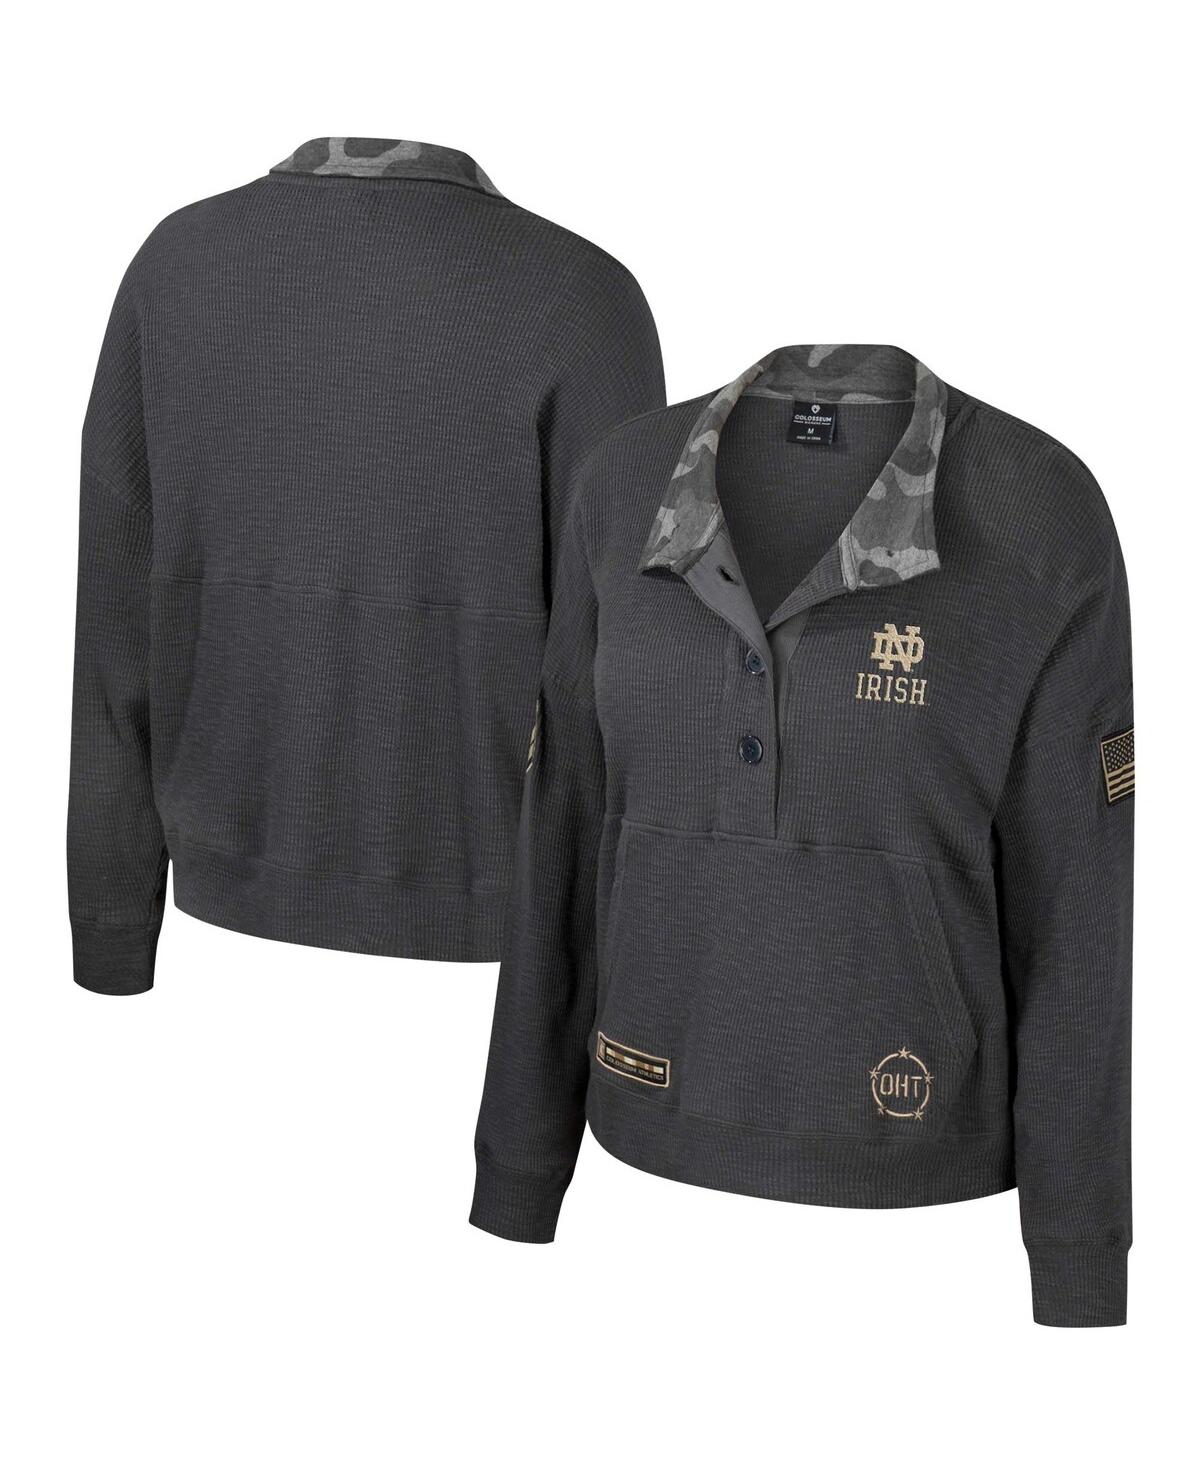 Women's Colosseum Heather Charcoal Notre Dame Fighting Irish Oht Military-Inspired Appreciation Payback Henley Thermal Sweatshirt - Heather Charcoal